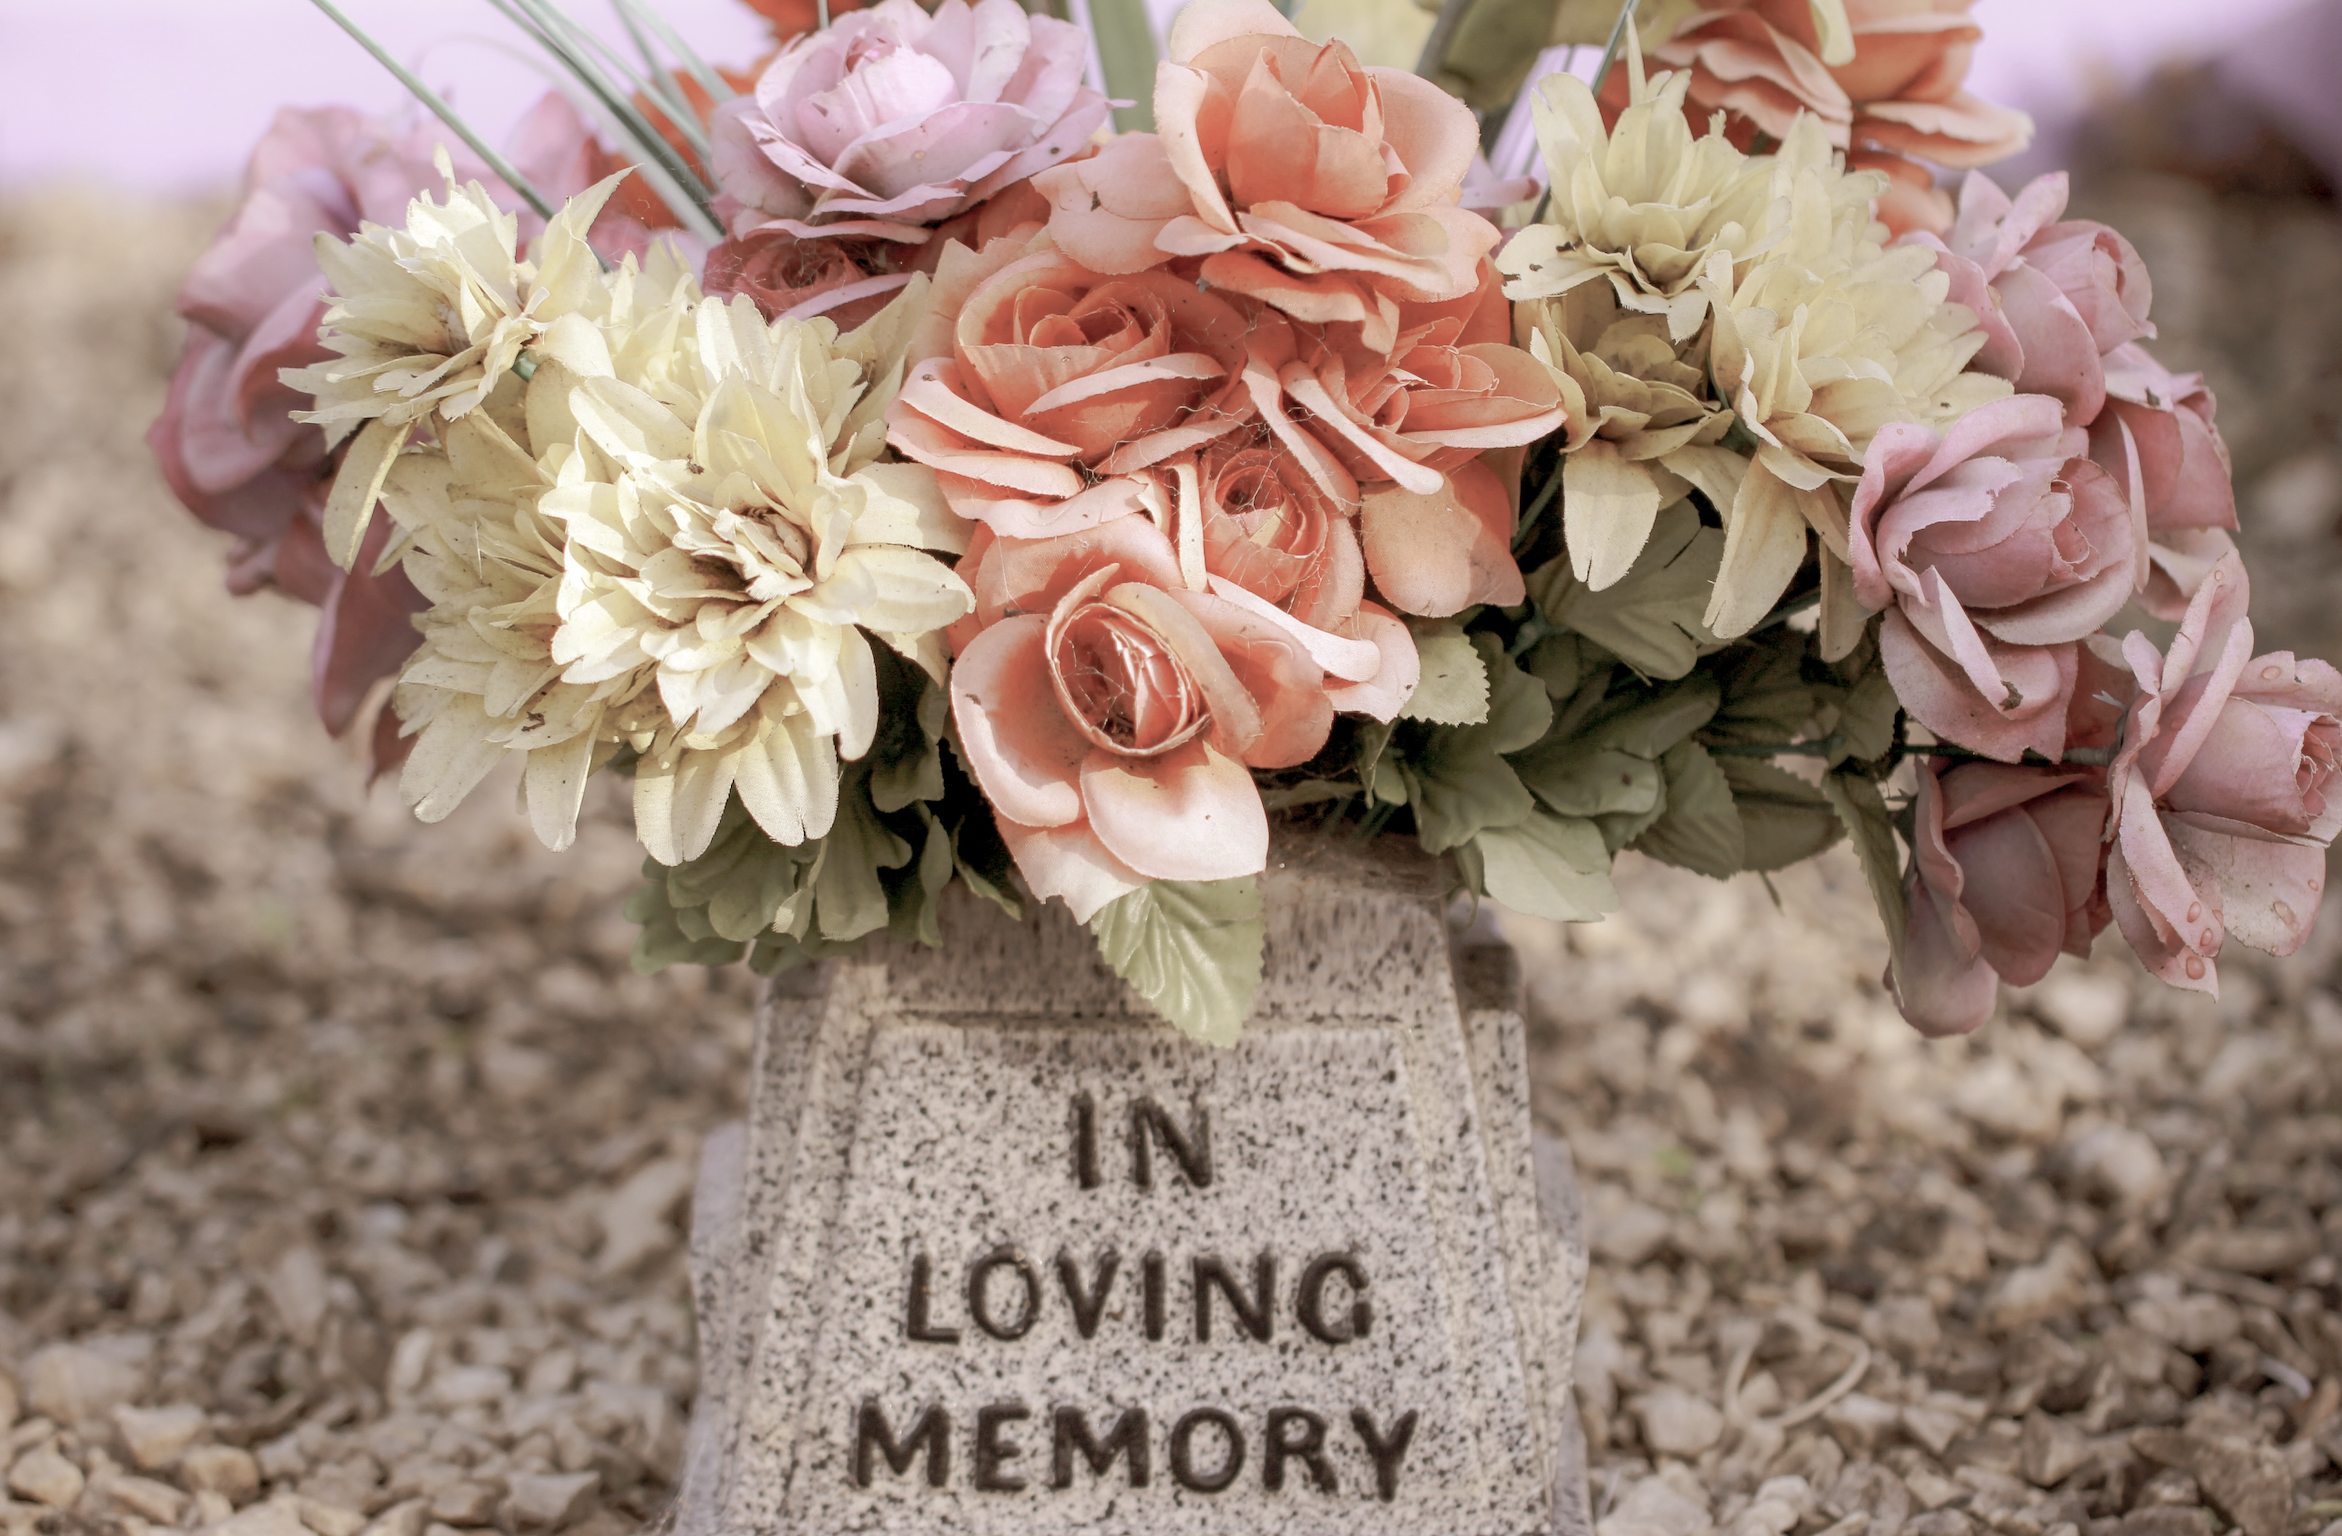 Flowers surround tombstone that reads "In loving memory" to represent probate